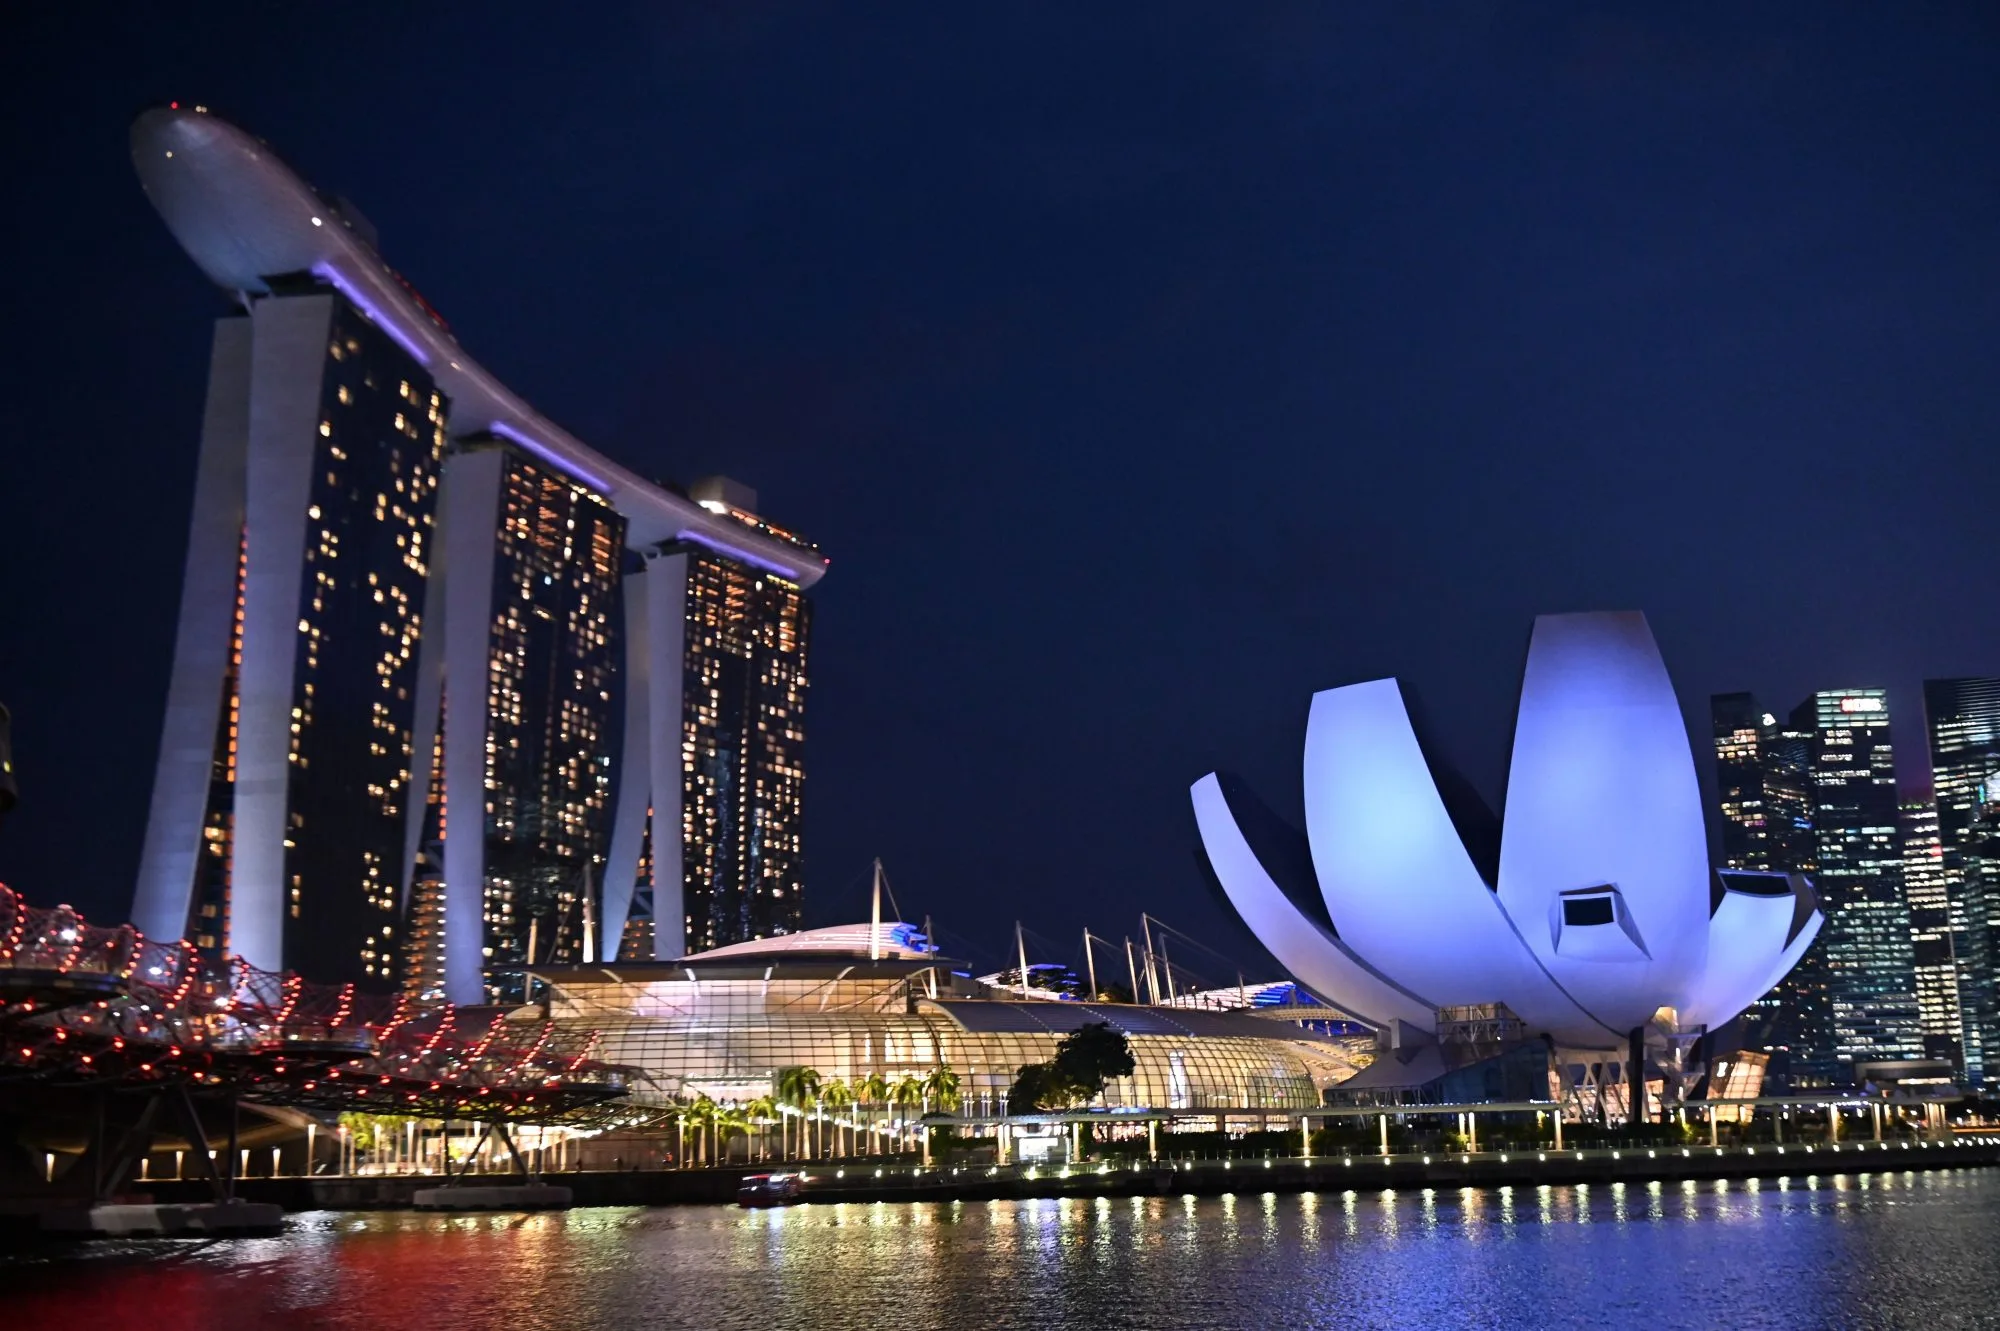 The Marina Bay Sands hotel and resorts (L) and the ArtScience Museum (R) are illuminated under the evening sky in Singapore on March 8, 2019.